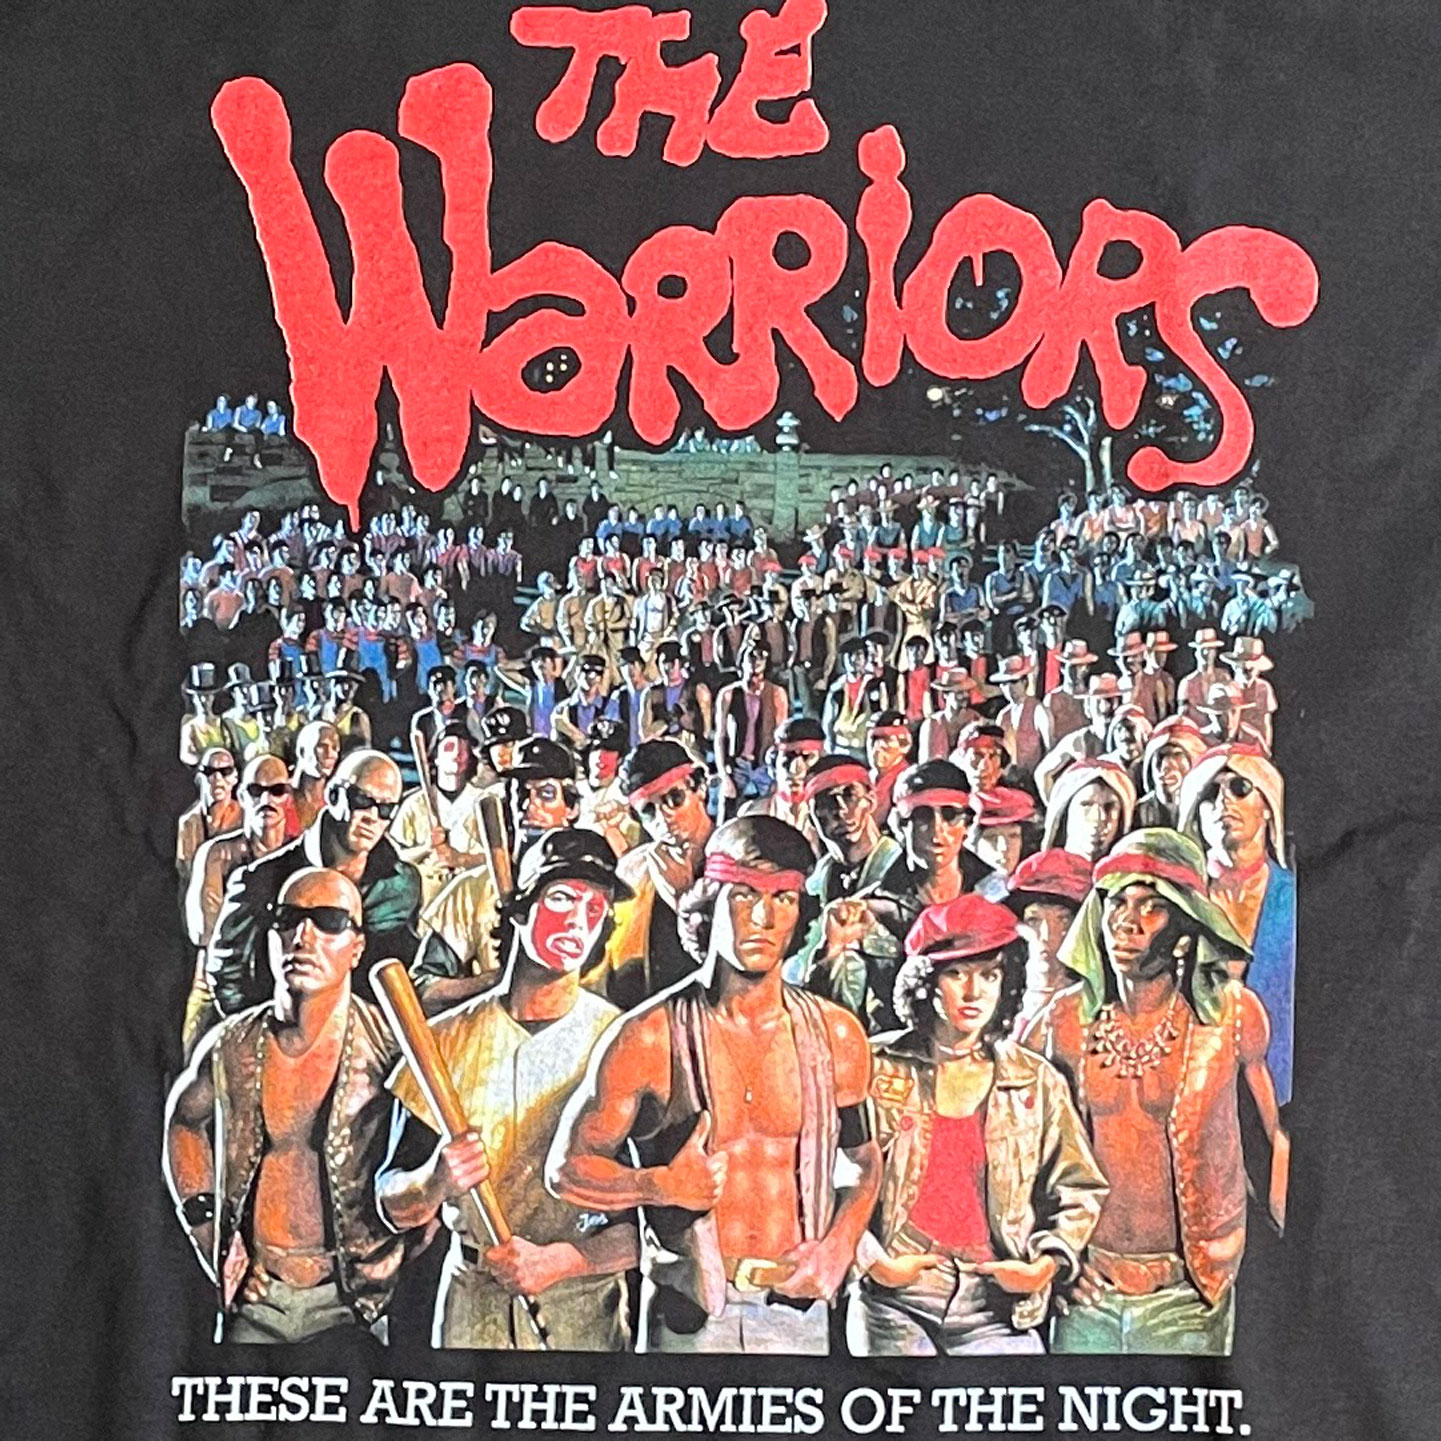 The Warriors Tシャツ THESE ARE THE ARMIES OF THE NIGHT